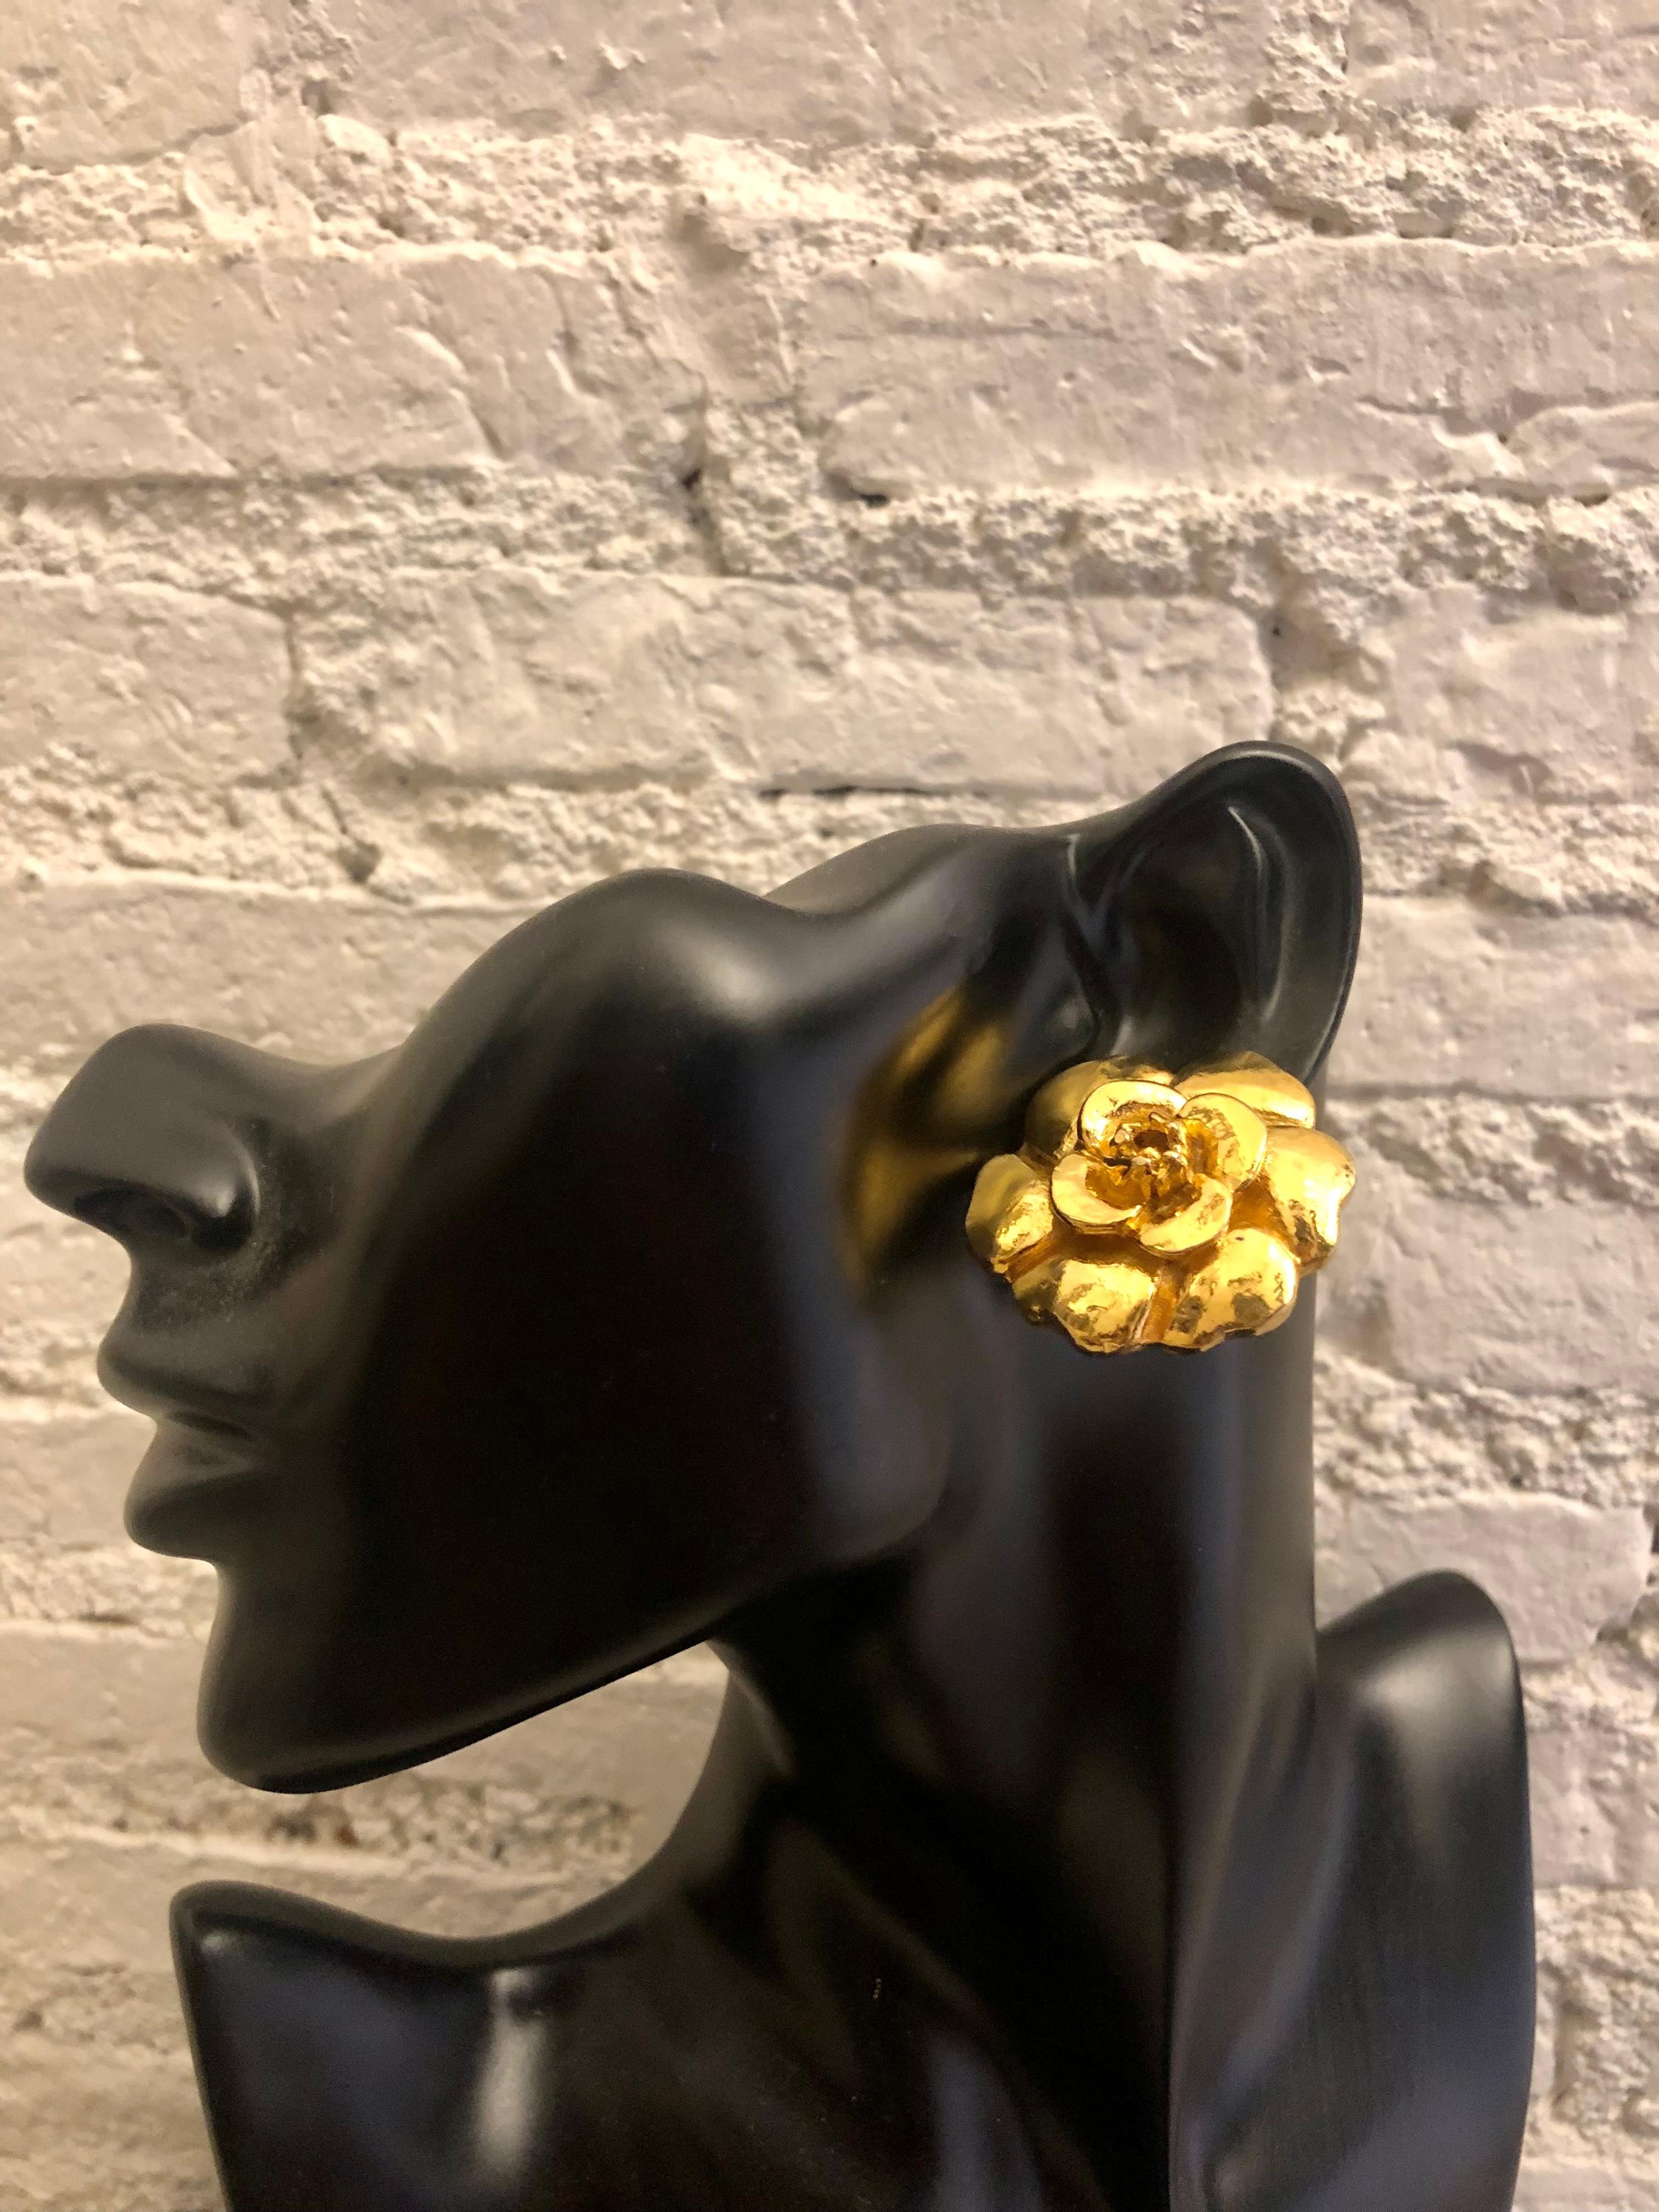 These Vintage CHANEL clip-on earrings are beautifully crafted of gold plated metal in Chanel’s iconic camellia flower. They are truly vintage Chanel from the 1970s era. Stamped CHANEL made in France. Diameter measures approximately 3.5